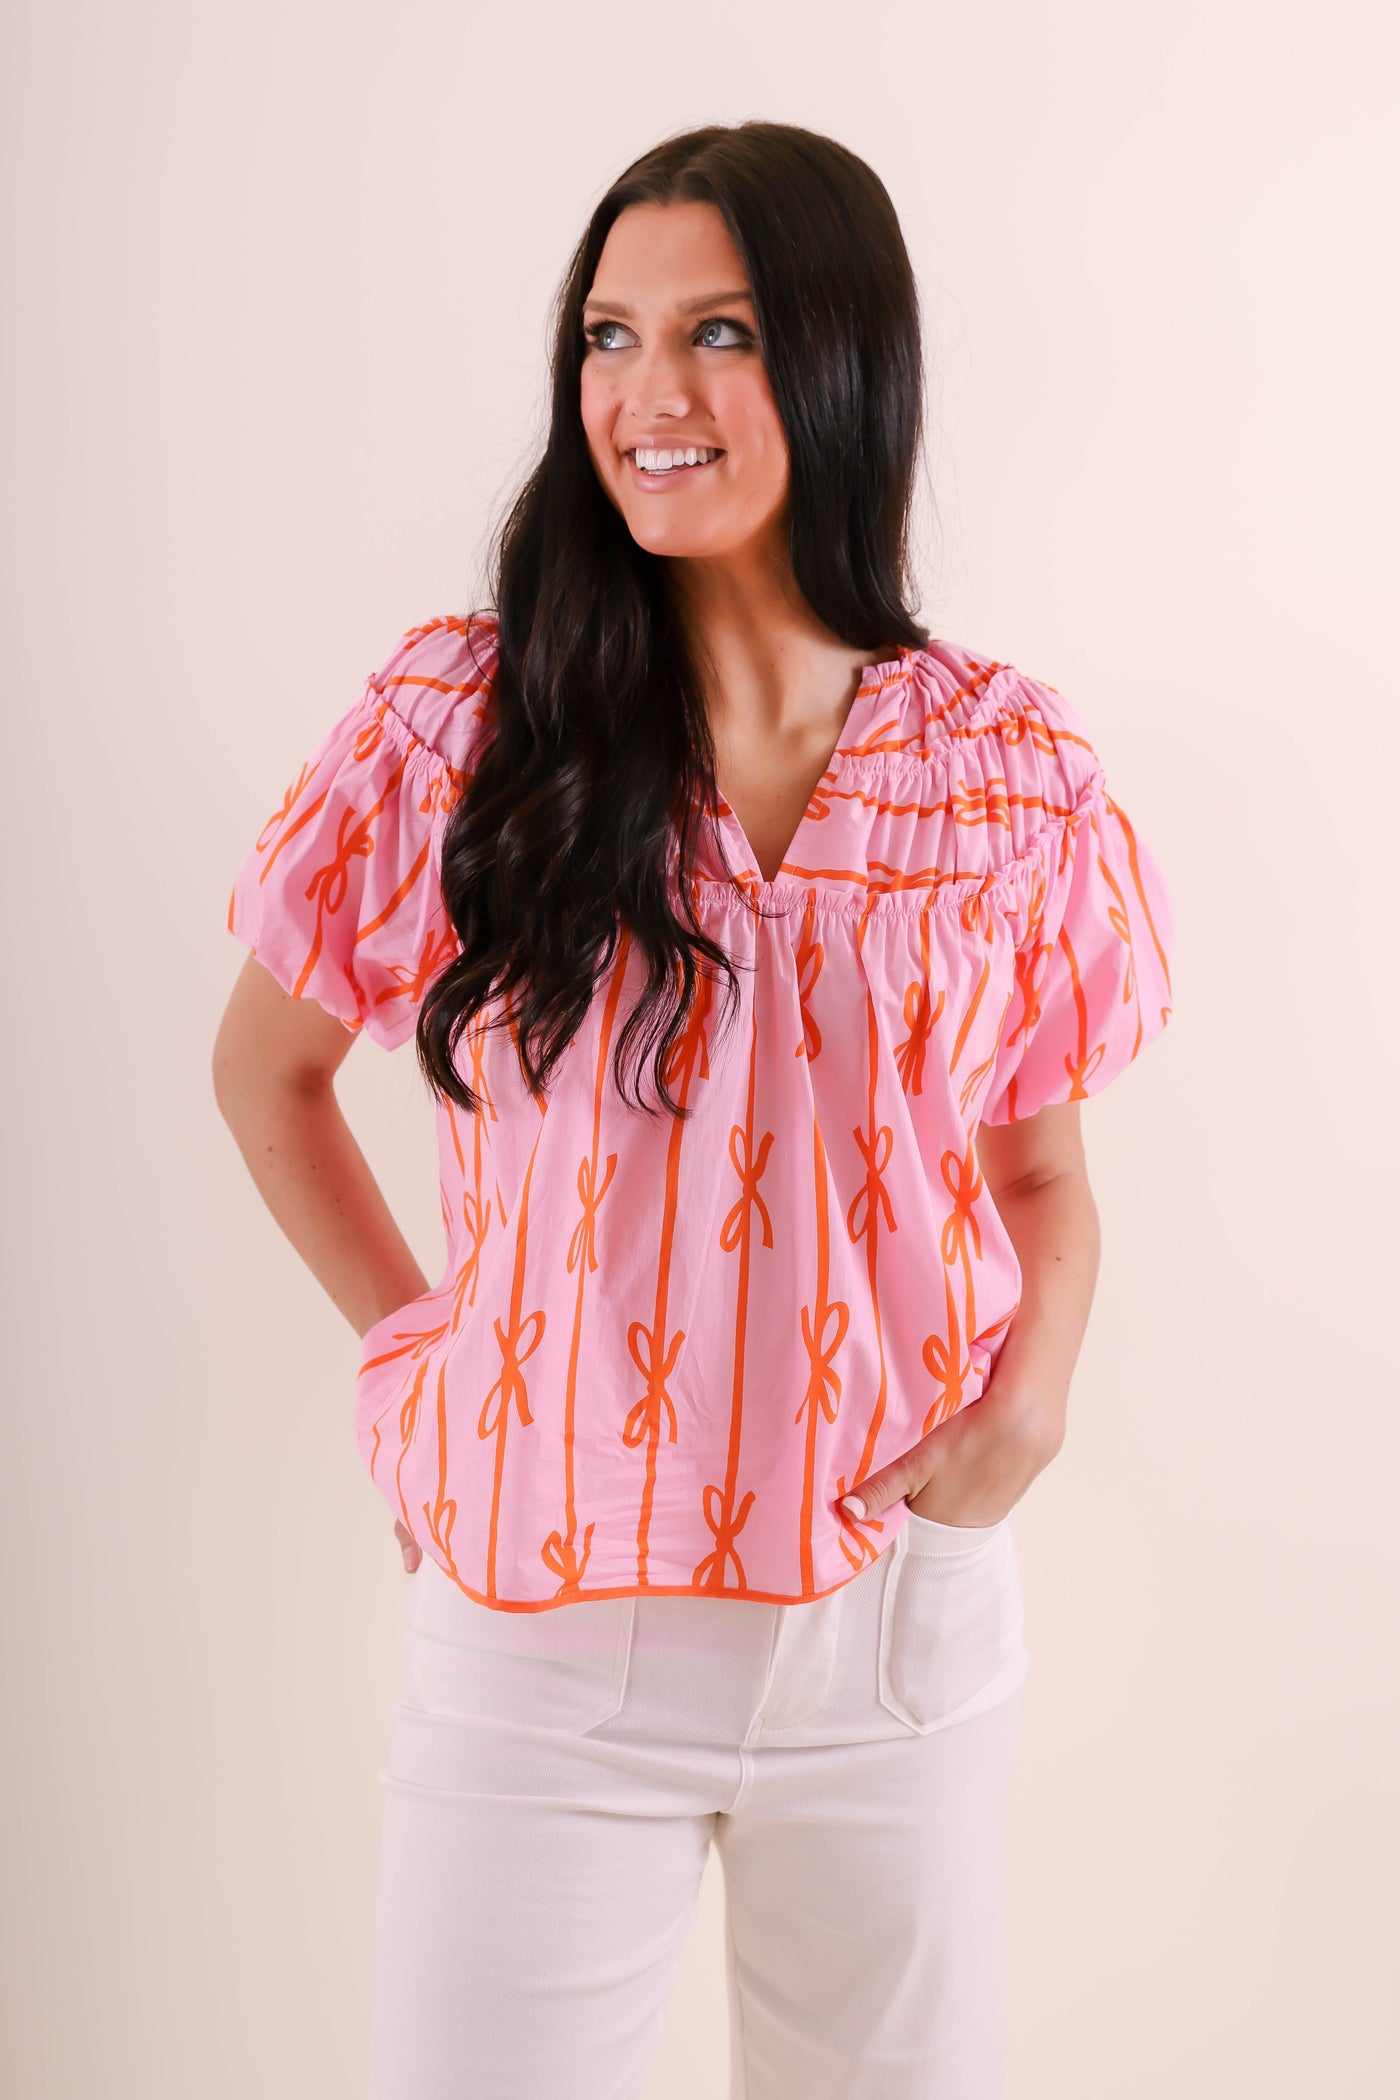 Women's Preppy Bow Blouse- Pink Printed Bow Blouse- Umgee Bow Top